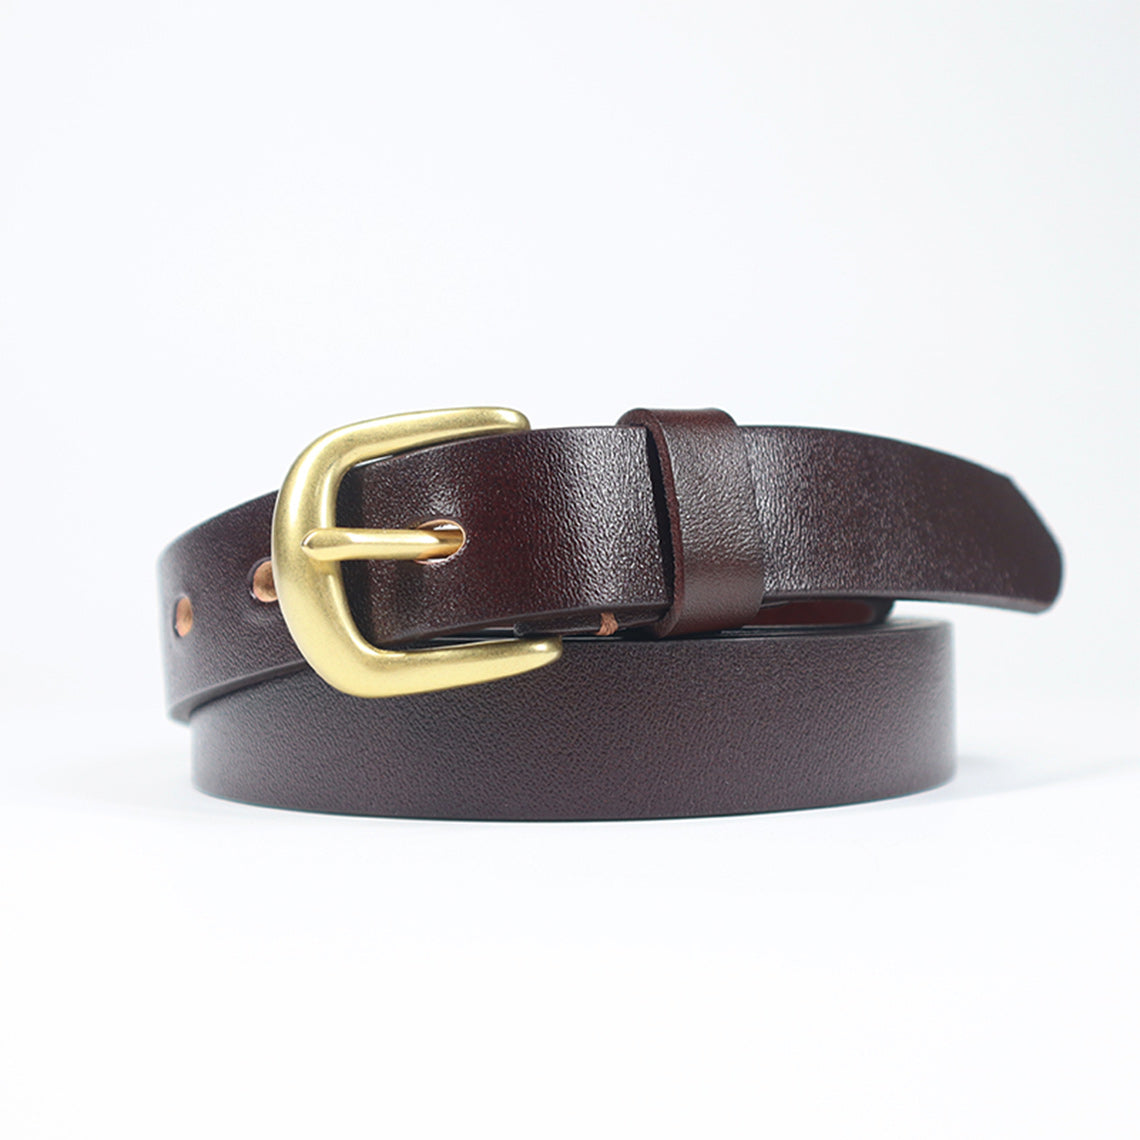 Brown Leather Belt for Women | Leather Handcraft DIY Kits - POPSEWING™